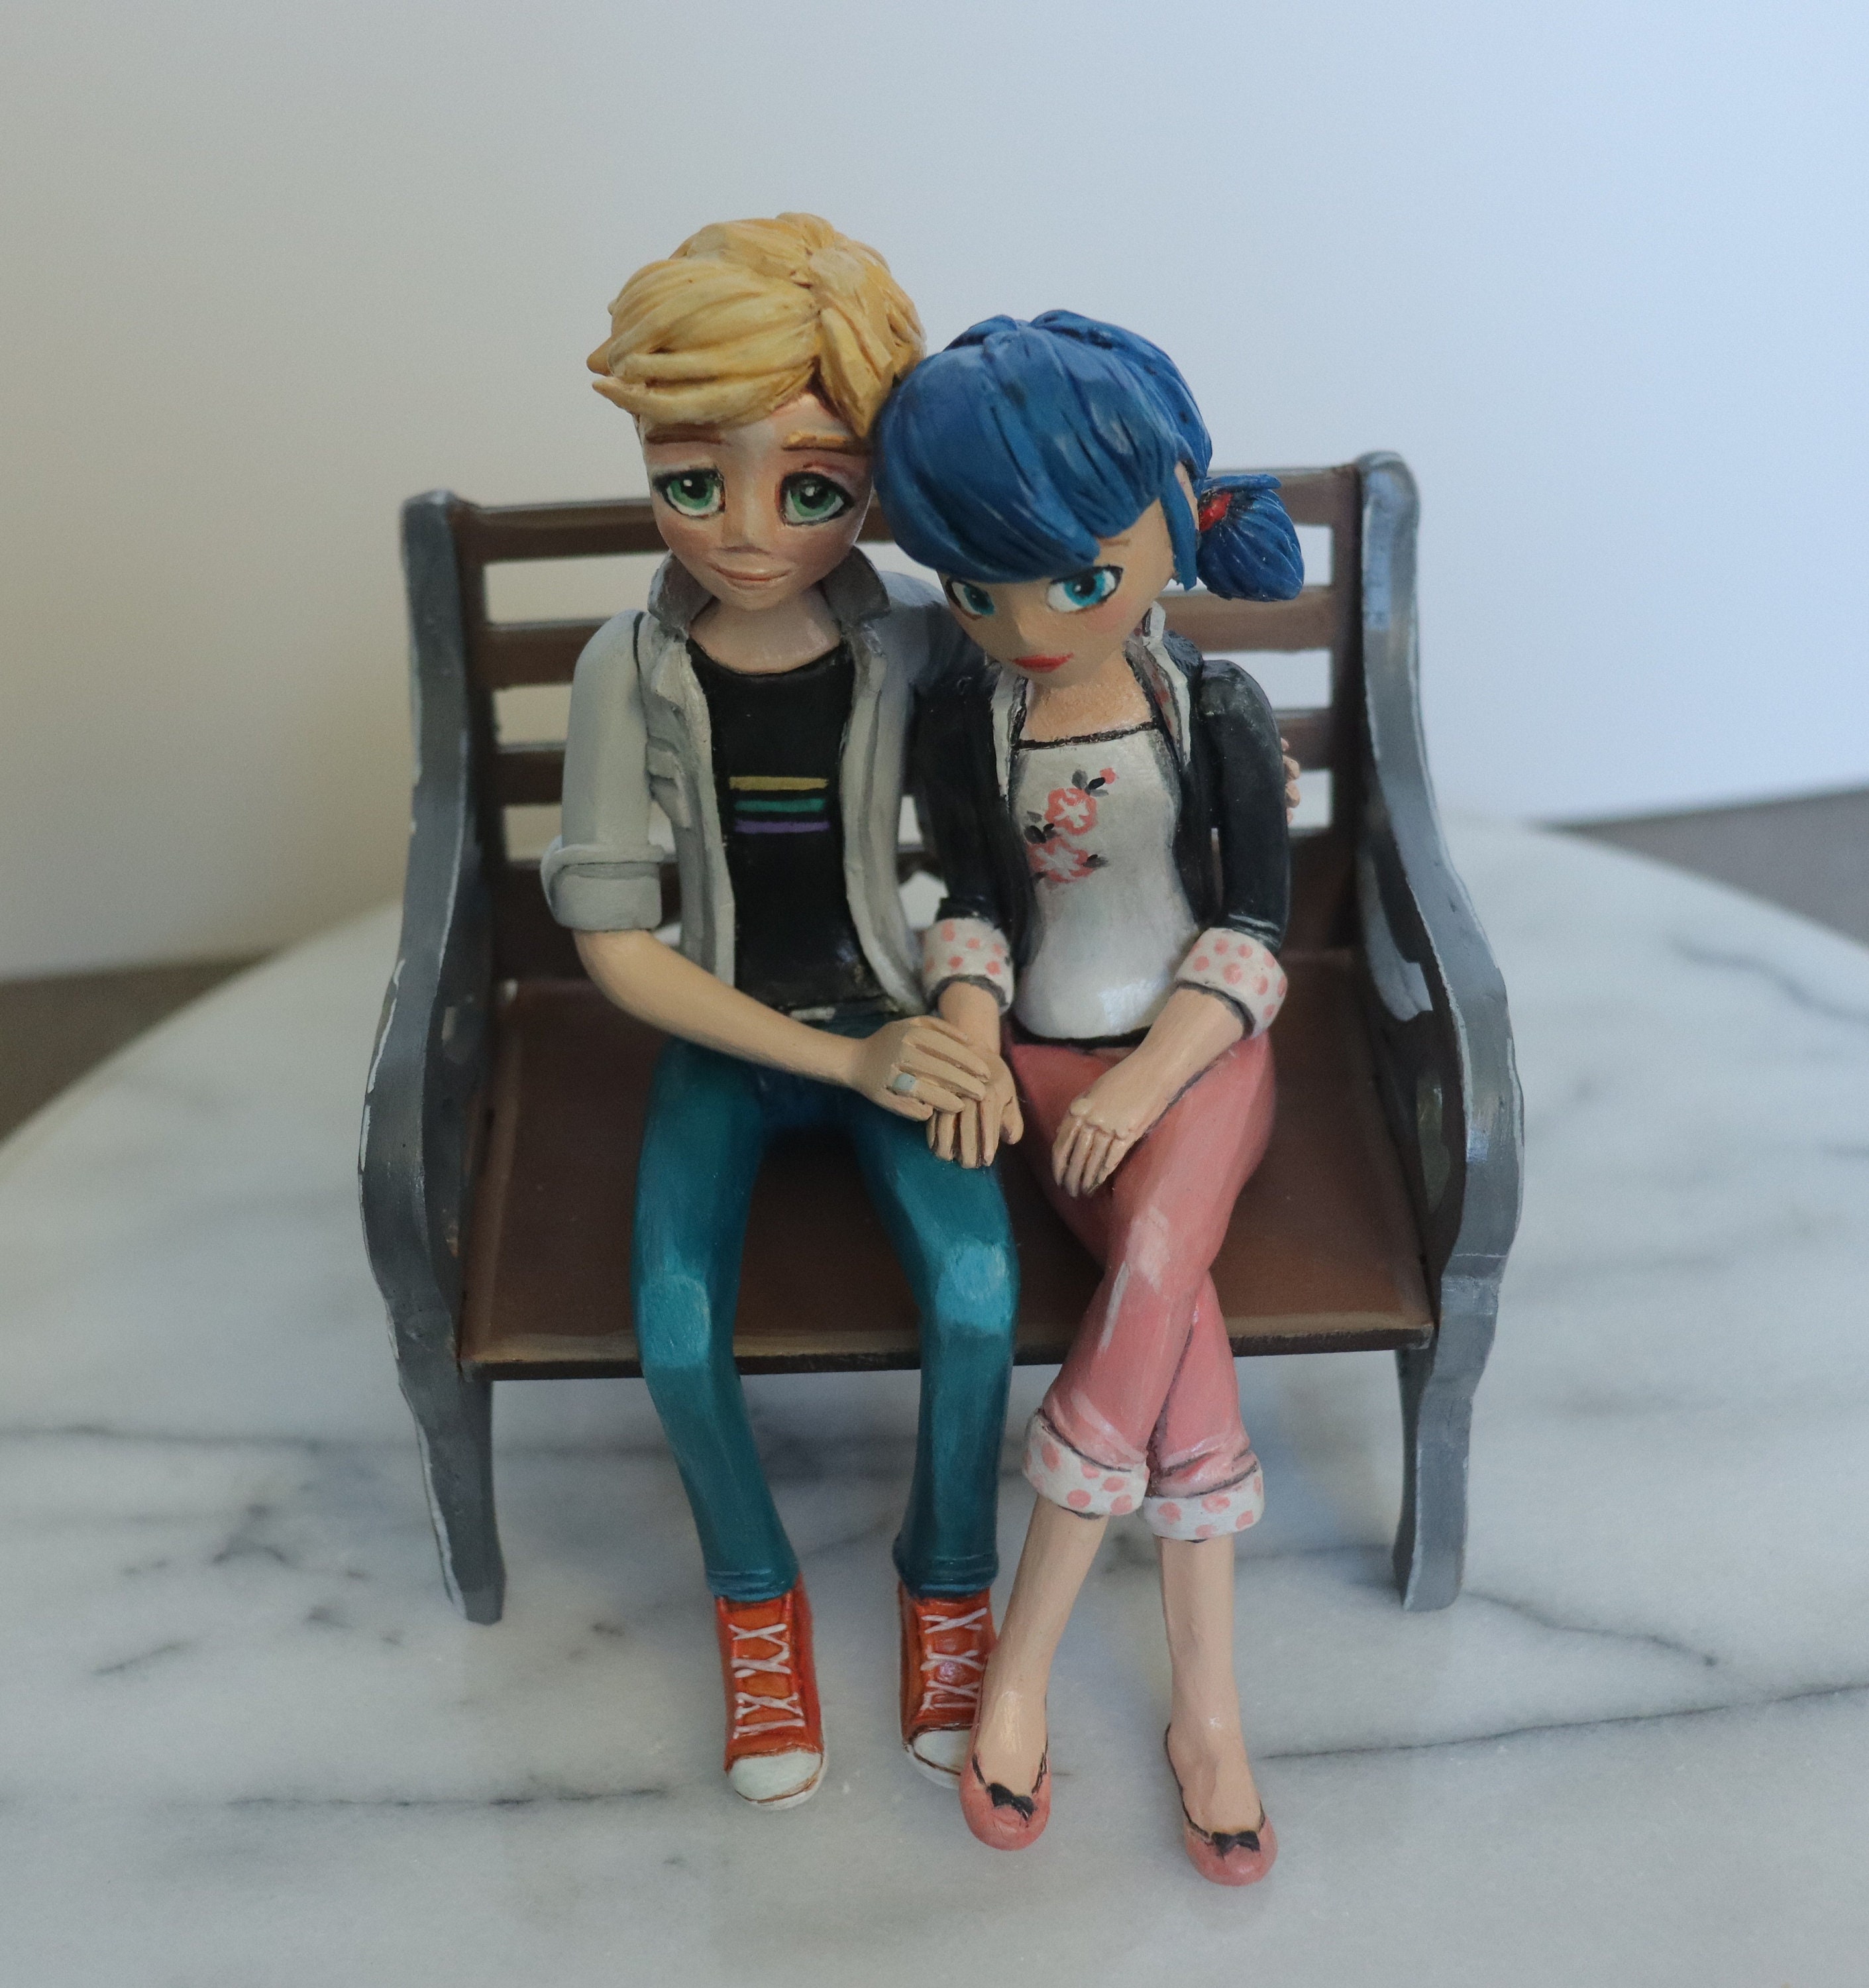 10-inch <i>Miraculous</i> Marinette and Adrien Dolls by Bandai